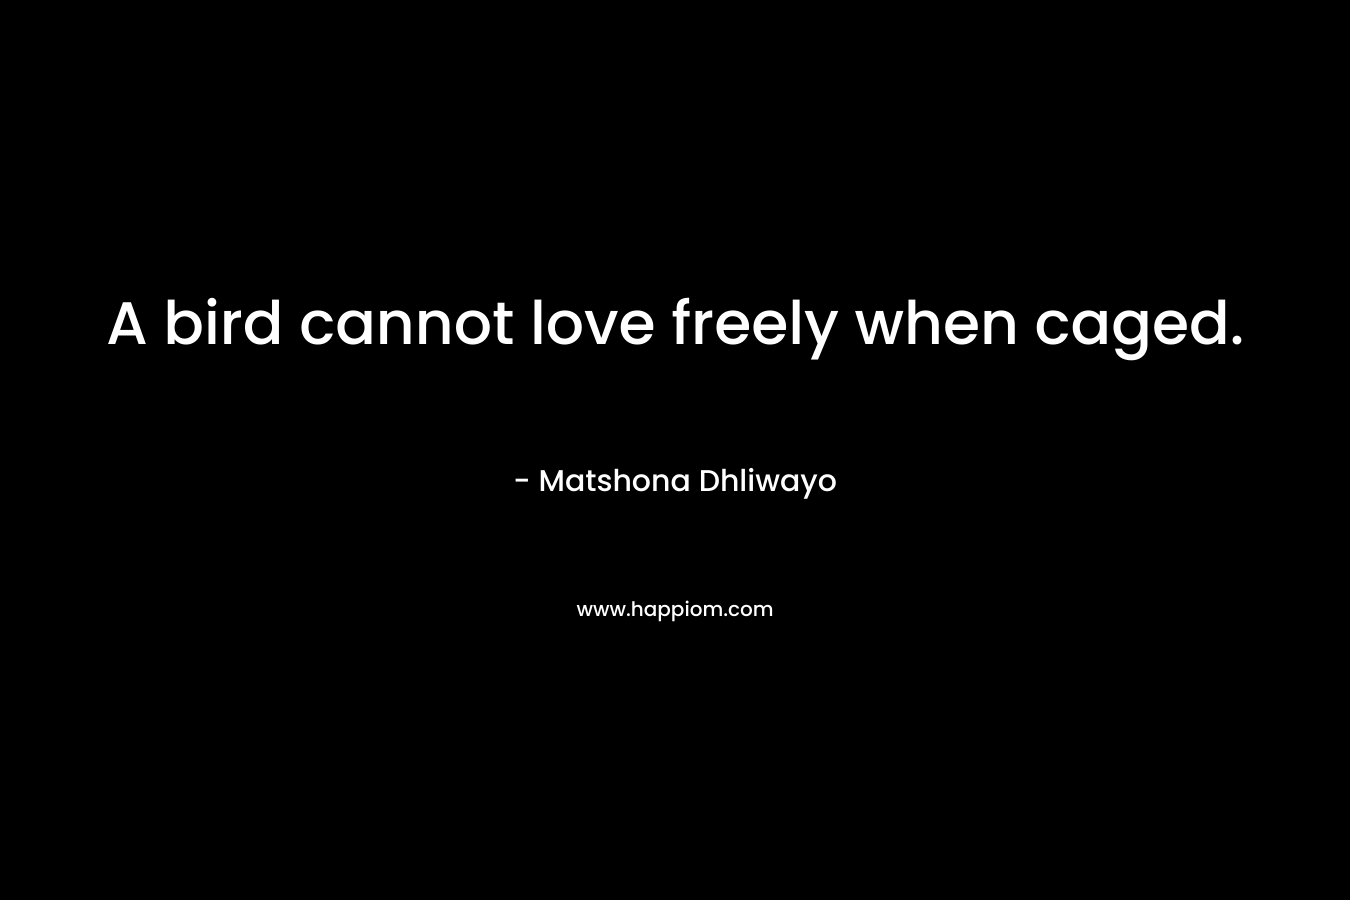 A bird cannot love freely when caged. – Matshona Dhliwayo